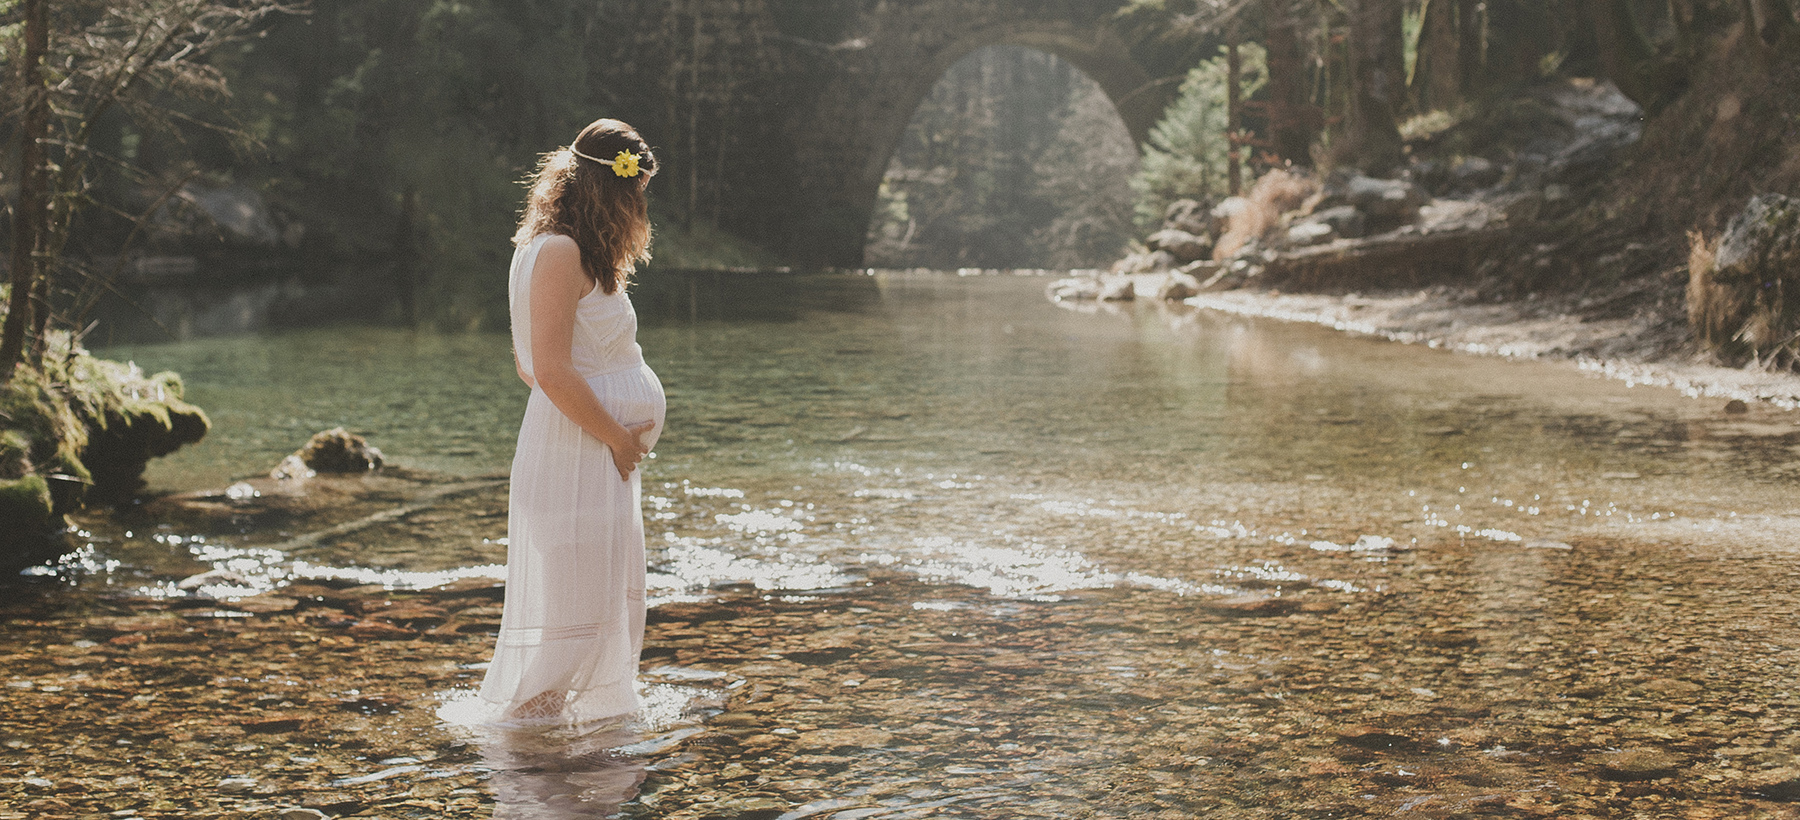 Pregnant outdoor photography.